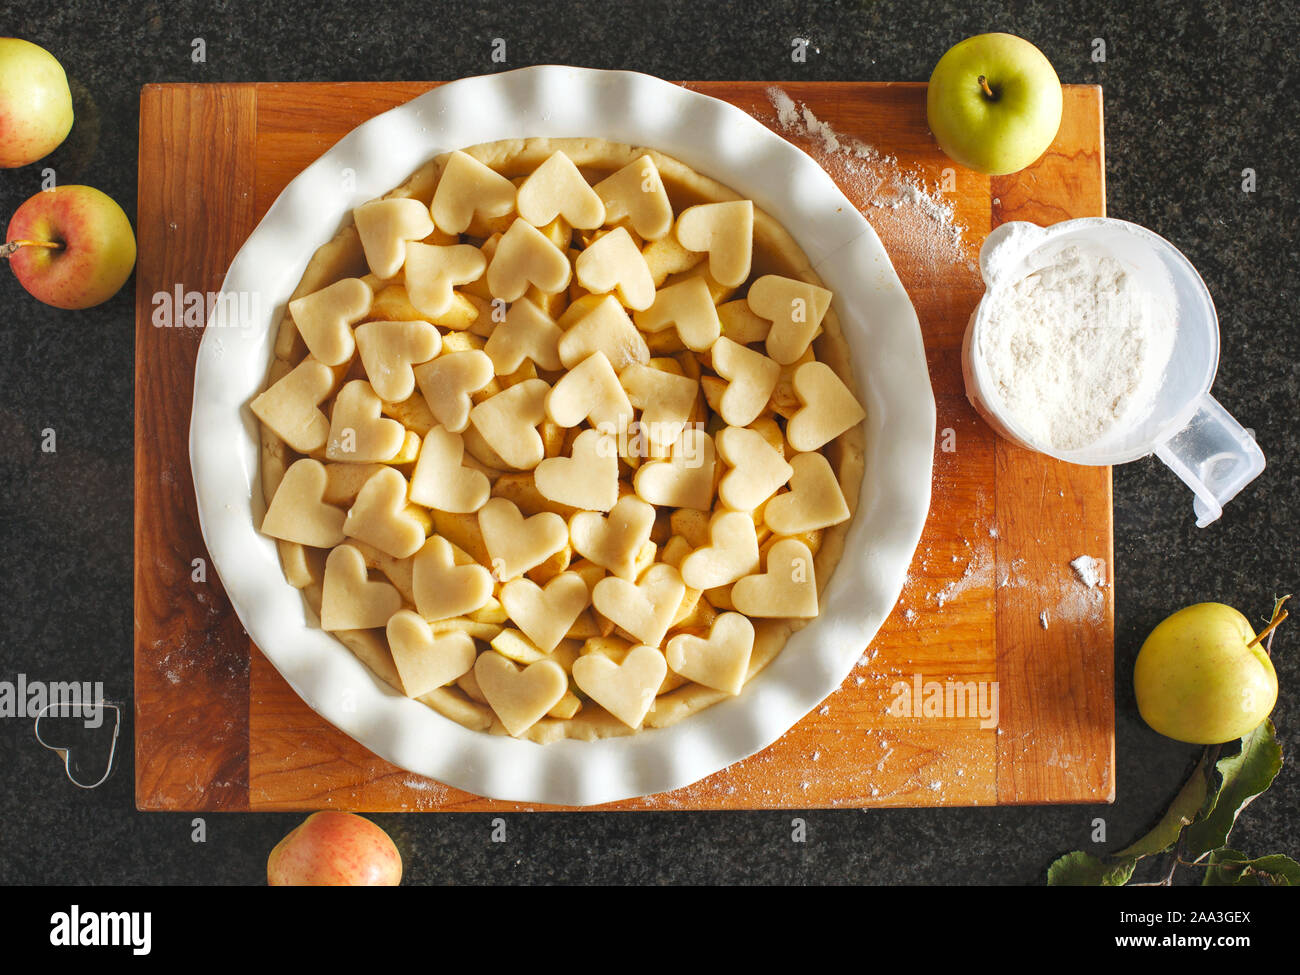 Overhead view of a raw apple pie ready to go into the oven Stock Photo